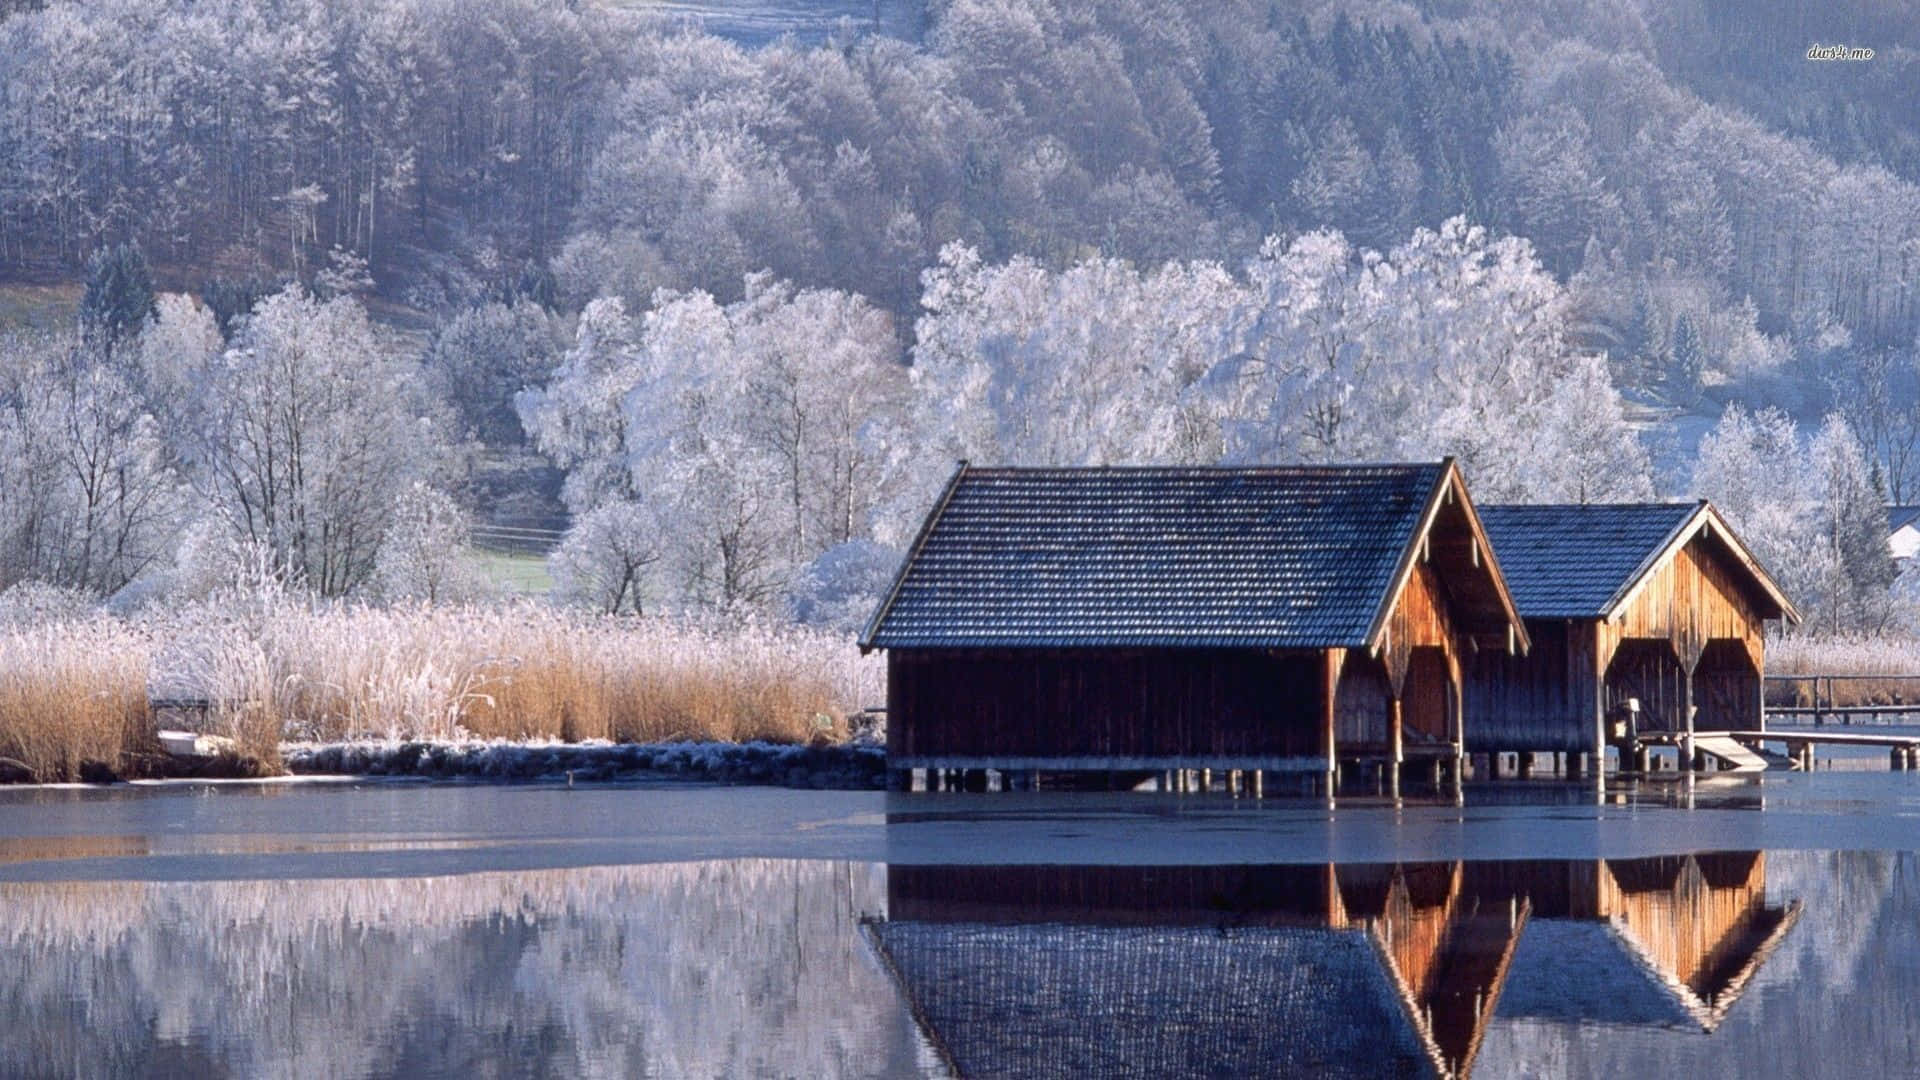 Two Wooden Cabins On A Frozen Lake